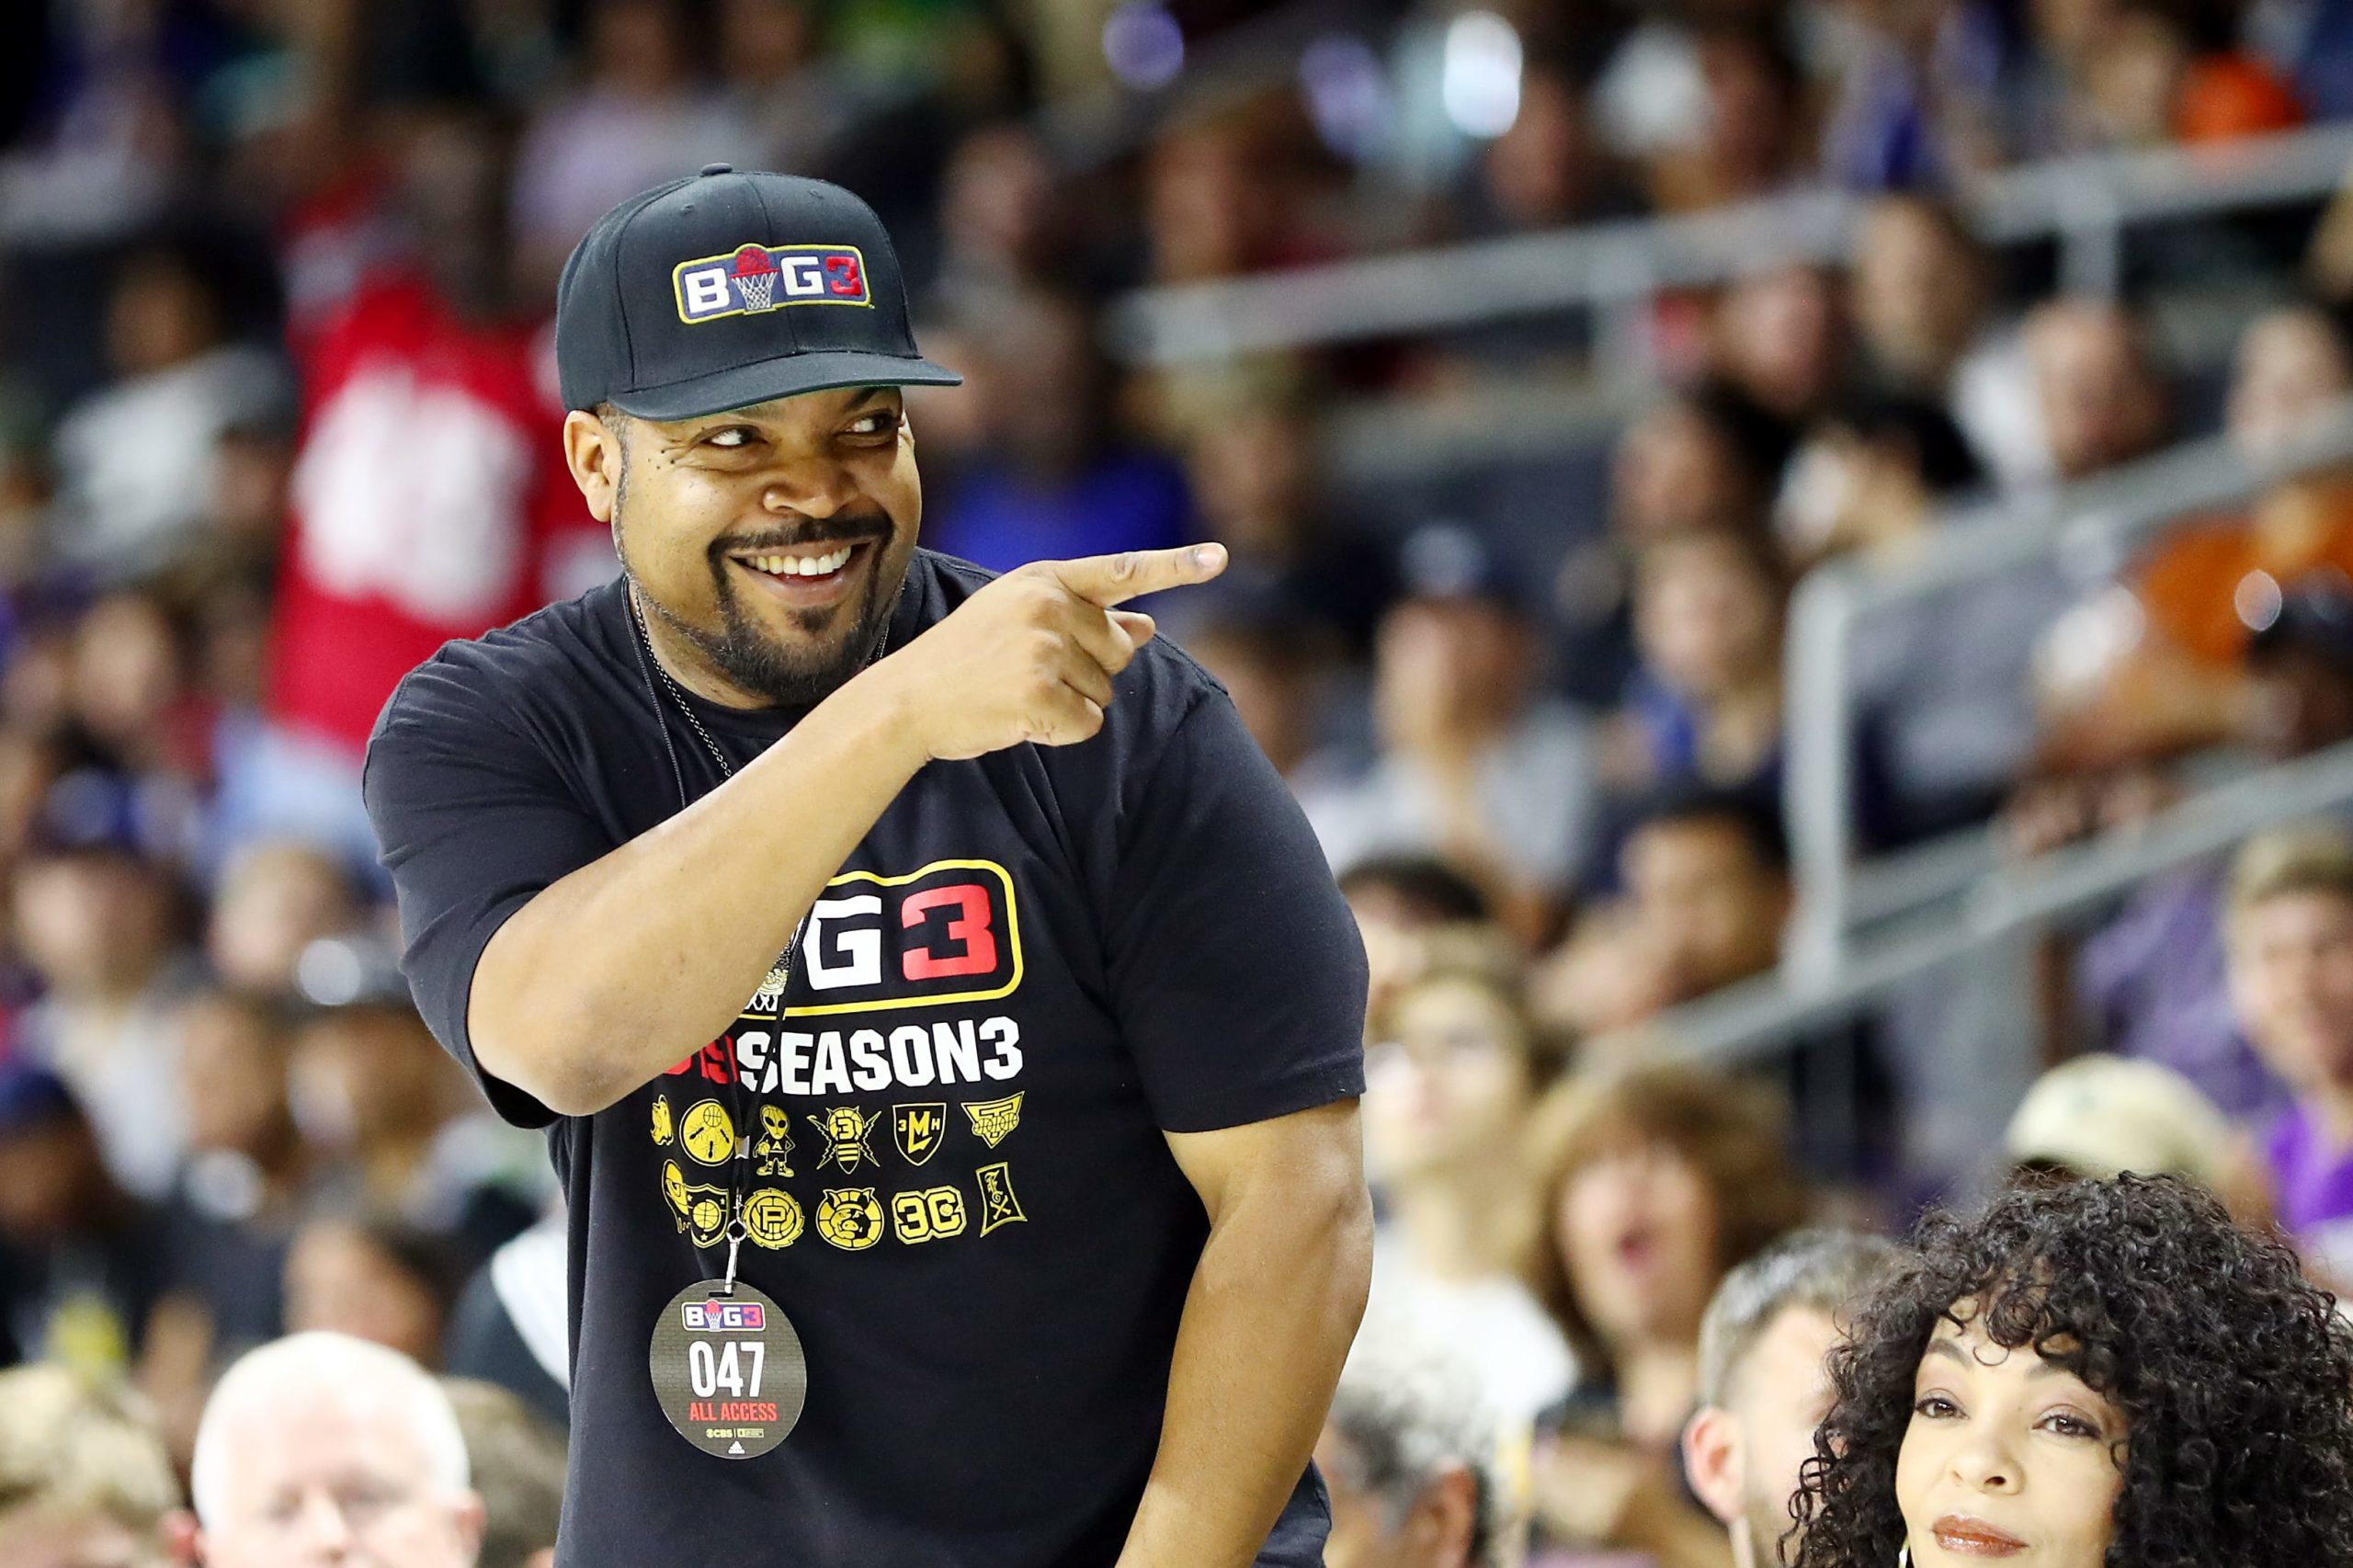 Big3 founder Ice Dice discusses adjustments for 2020 season